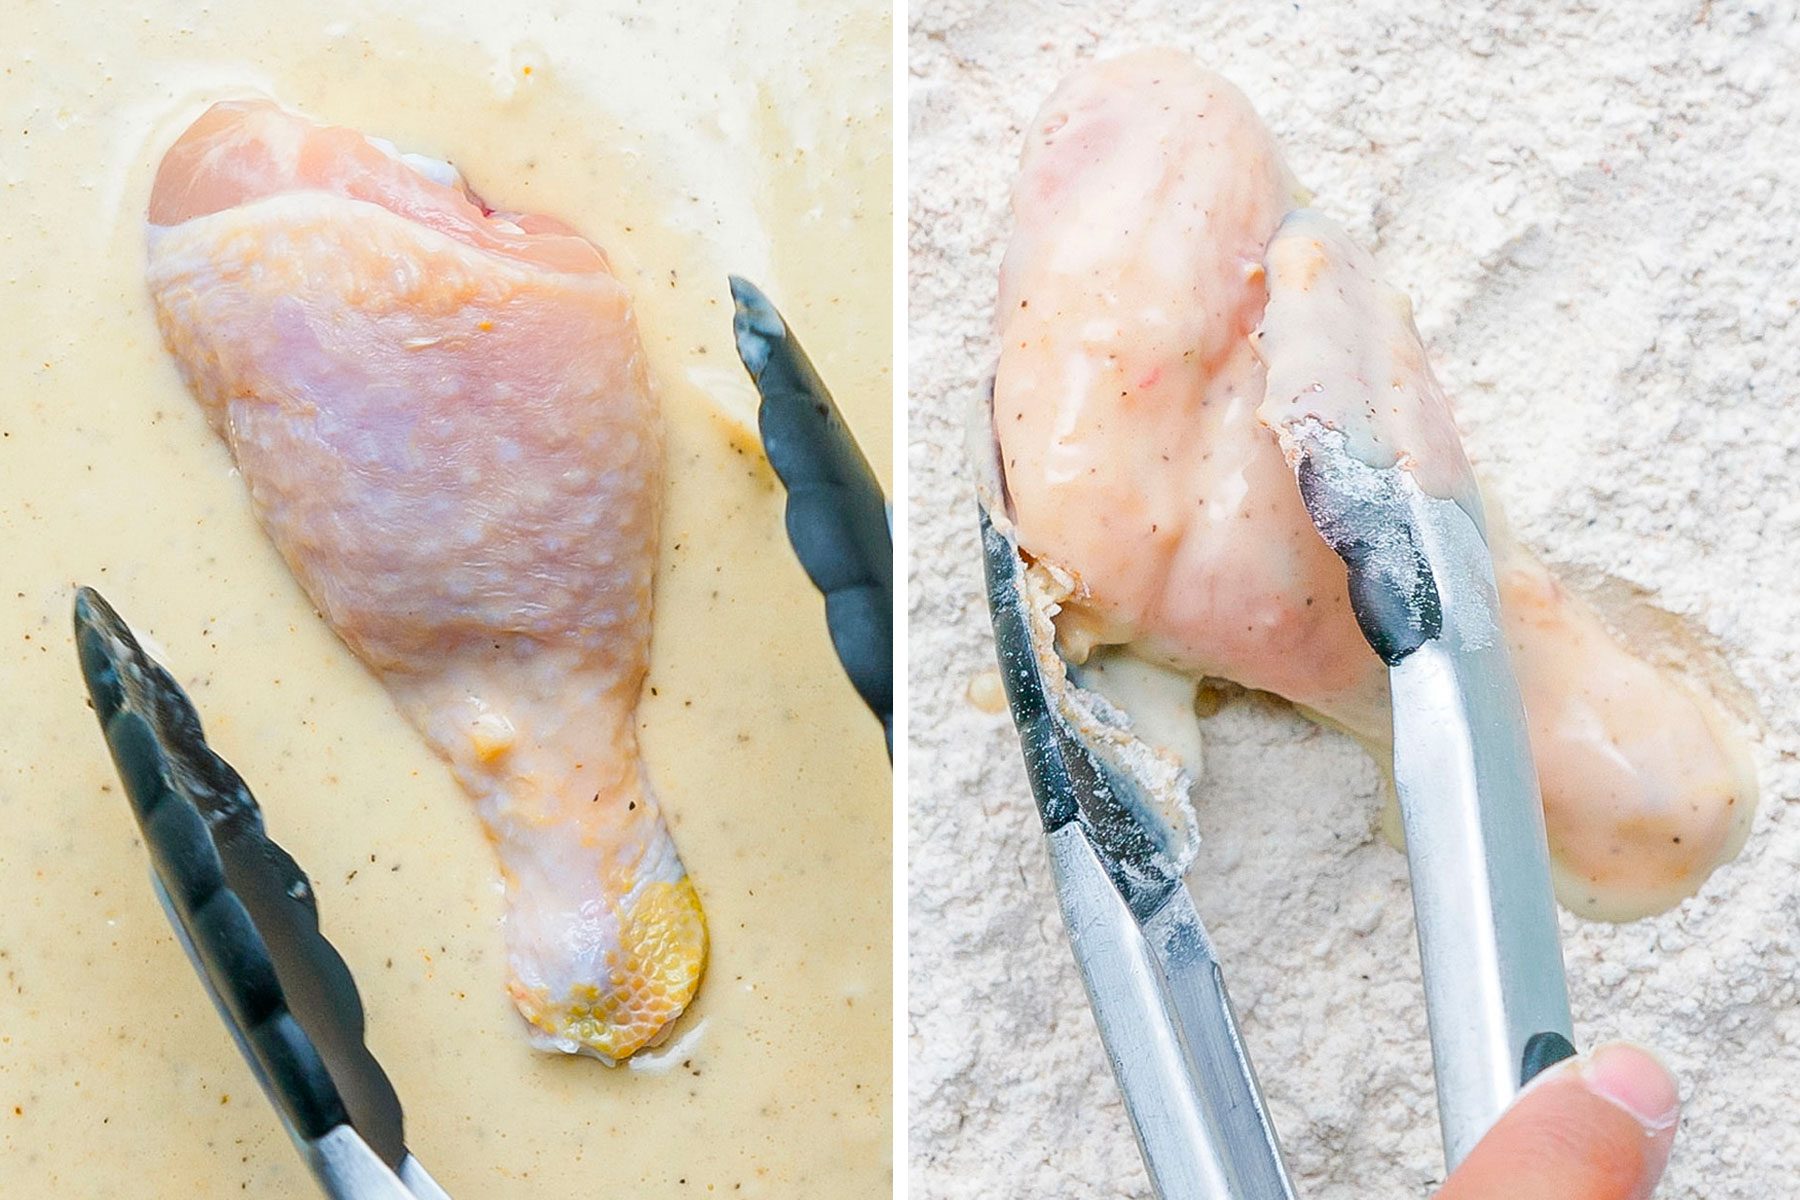 Coating Chicken with Egg Mix and Flour to Make Crispy Fried Chicken